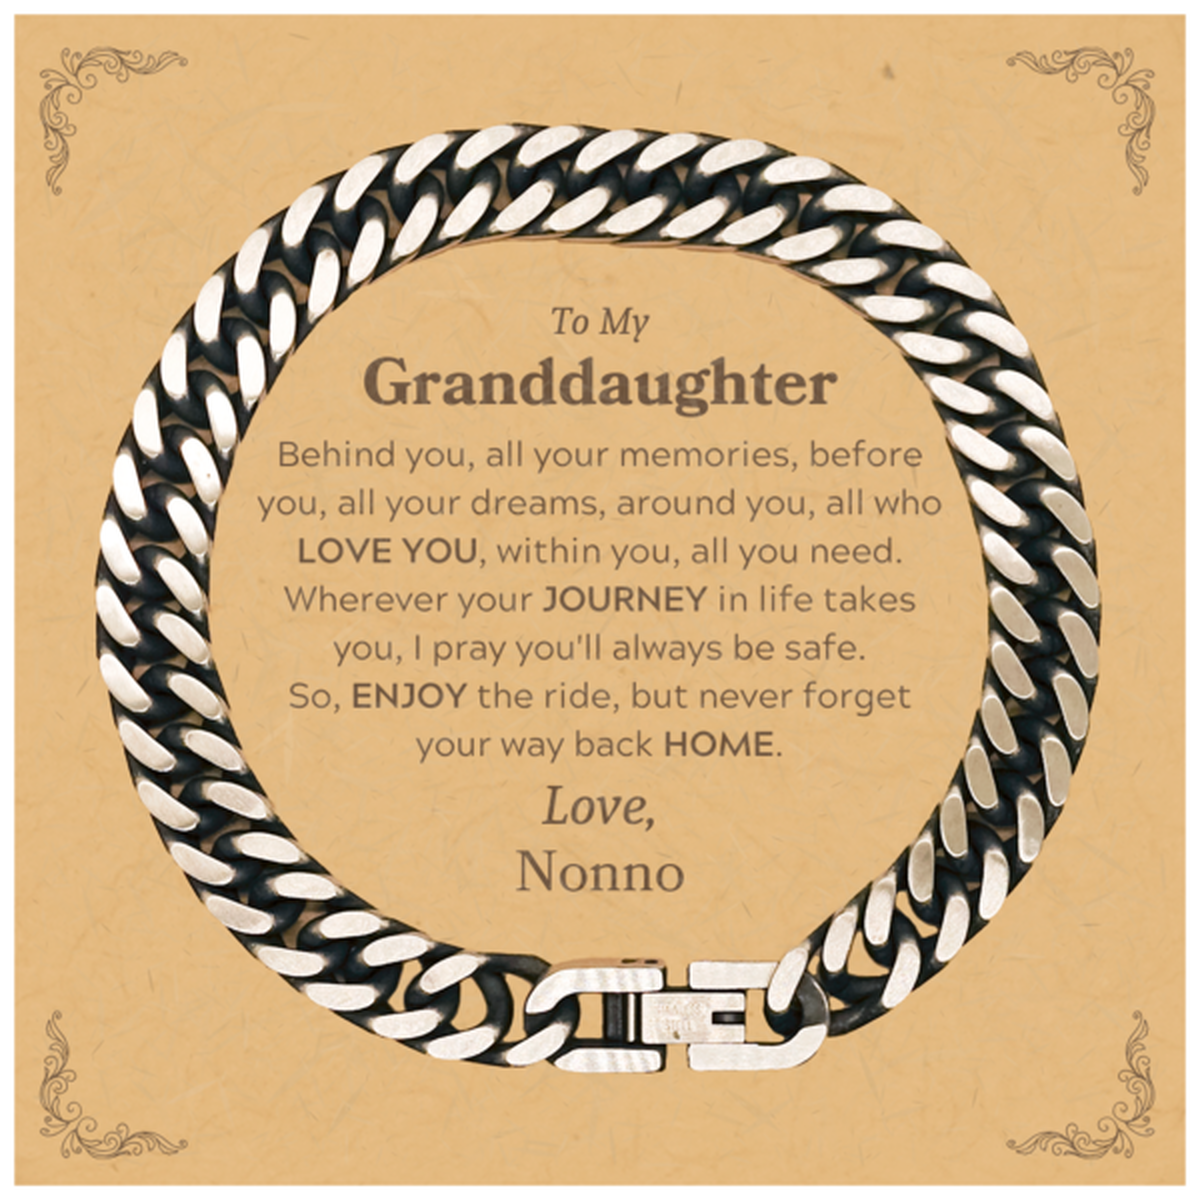 To My Granddaughter Graduation Gifts from Nonno, Granddaughter Cuban Link Chain Bracelet Christmas Birthday Gifts for Granddaughter Behind you, all your memories, before you, all your dreams. Love, Nonno